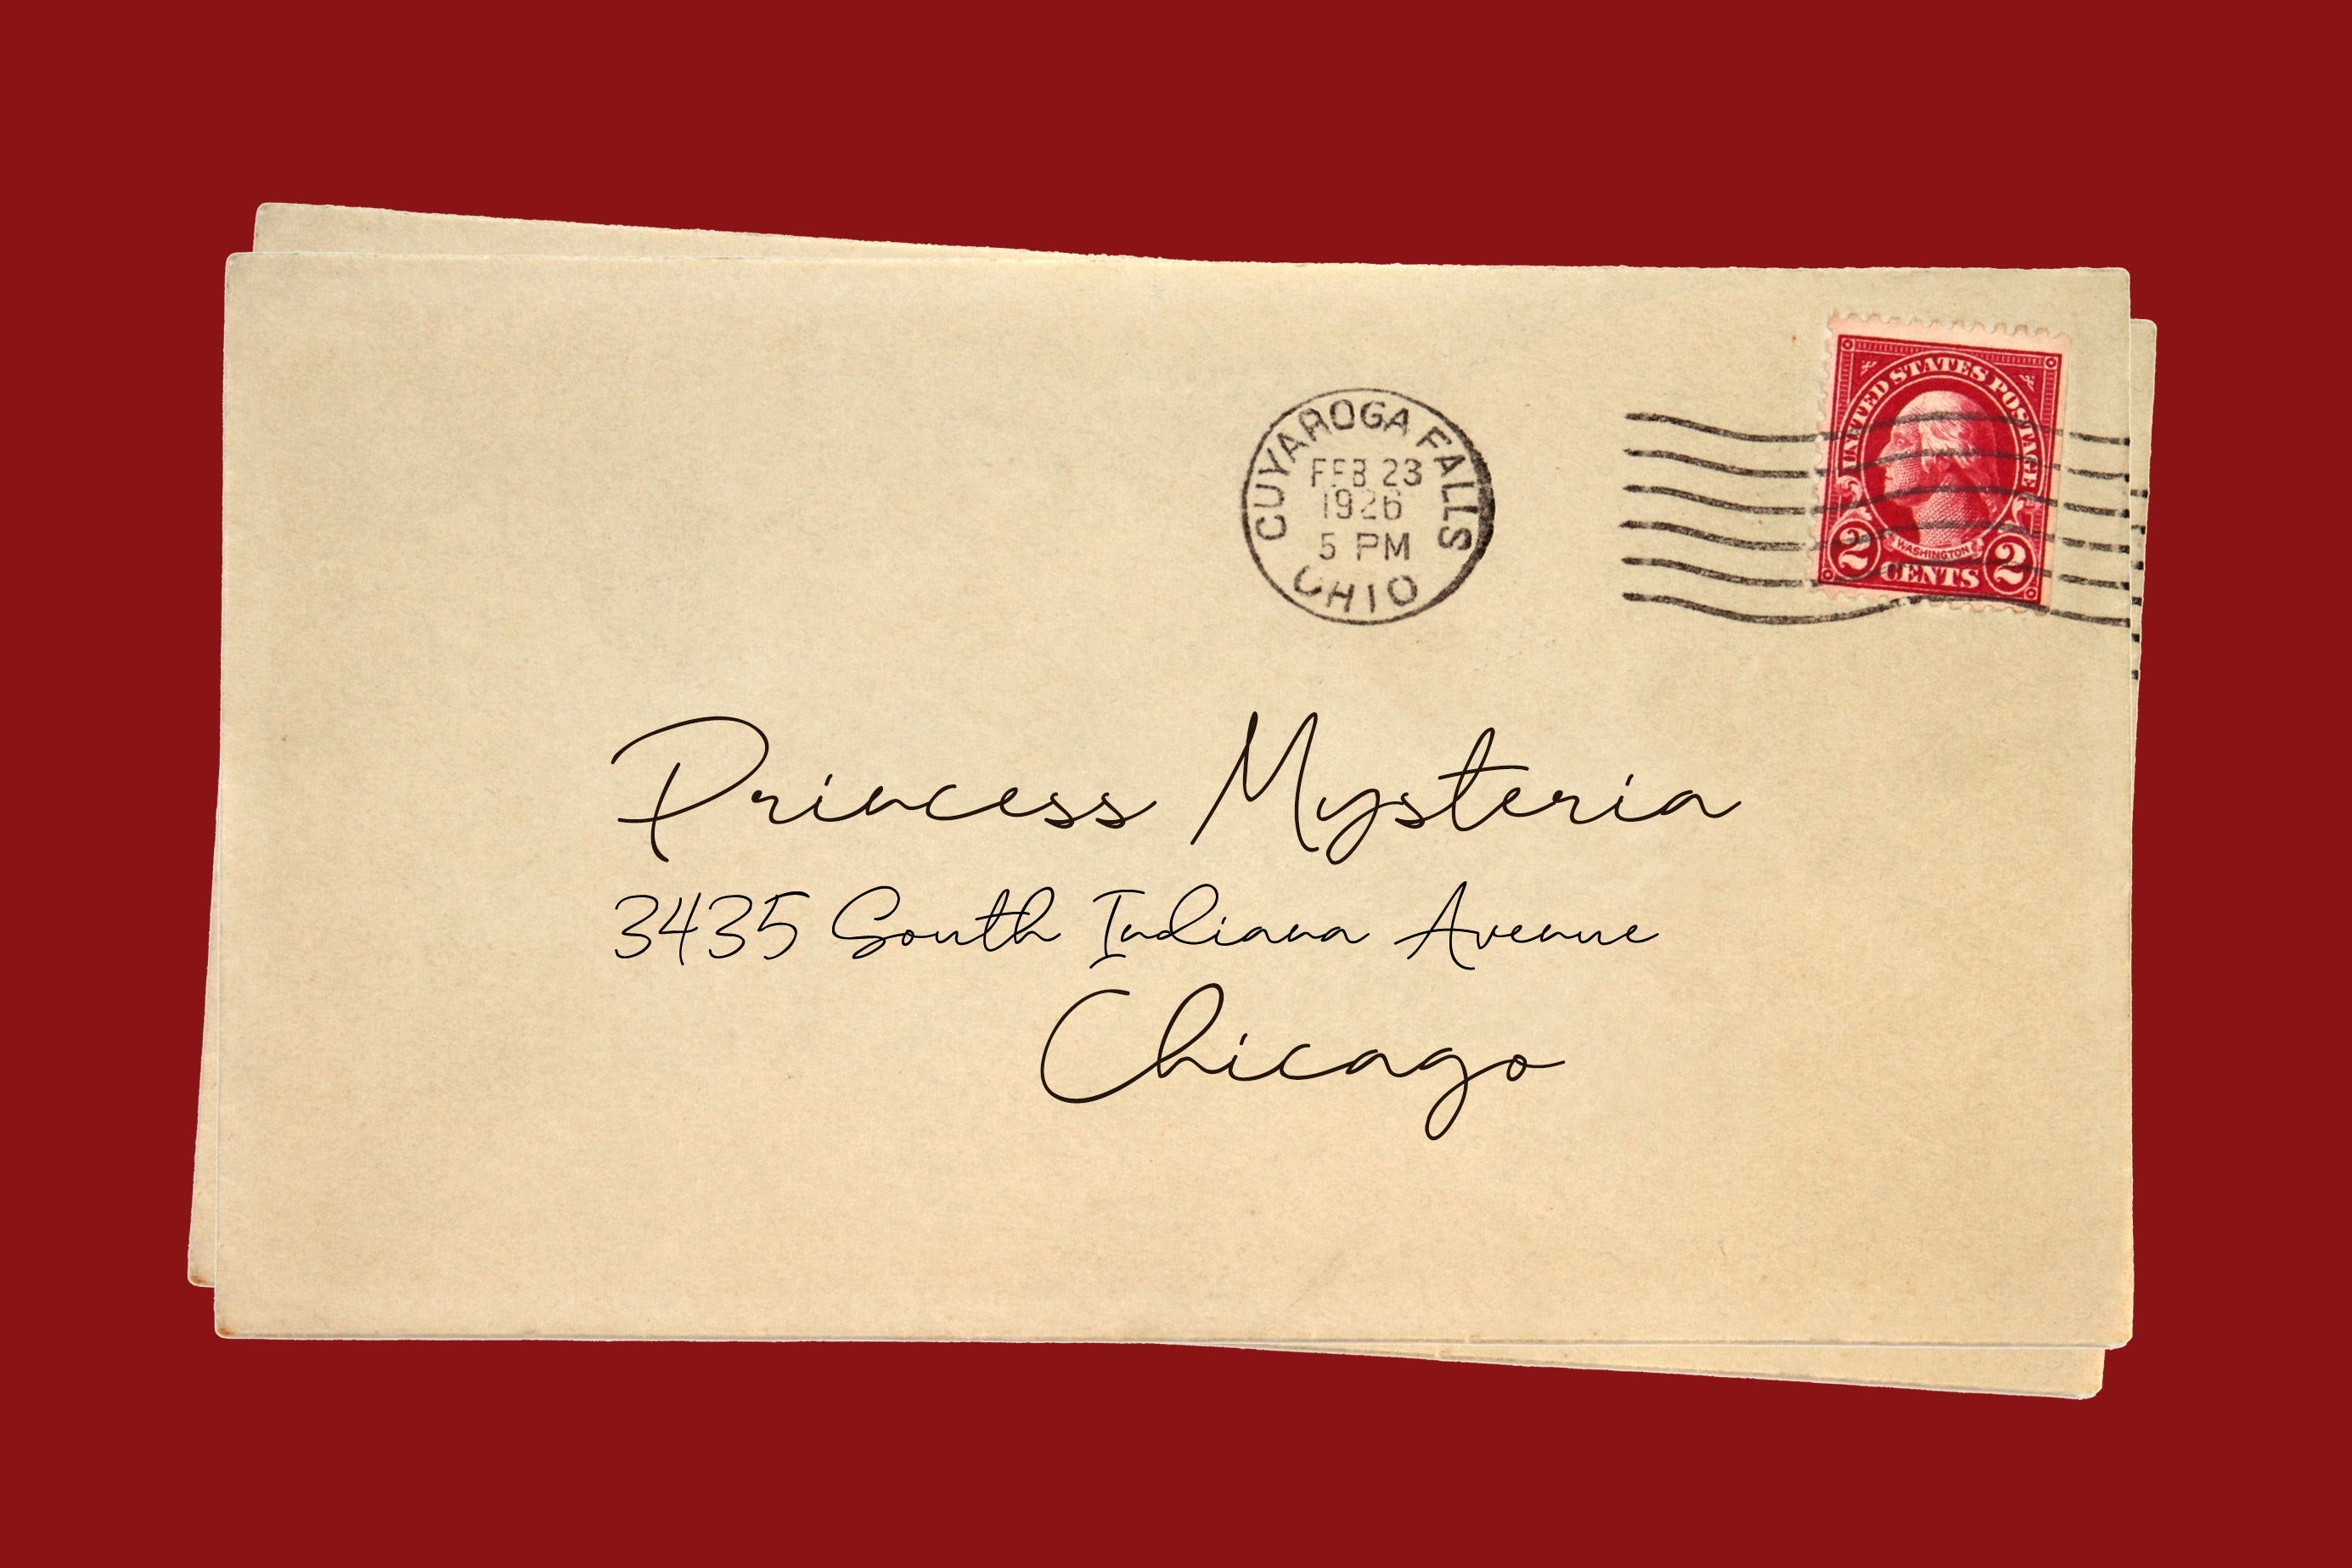 An envelope addressed to Princess Mysteria.